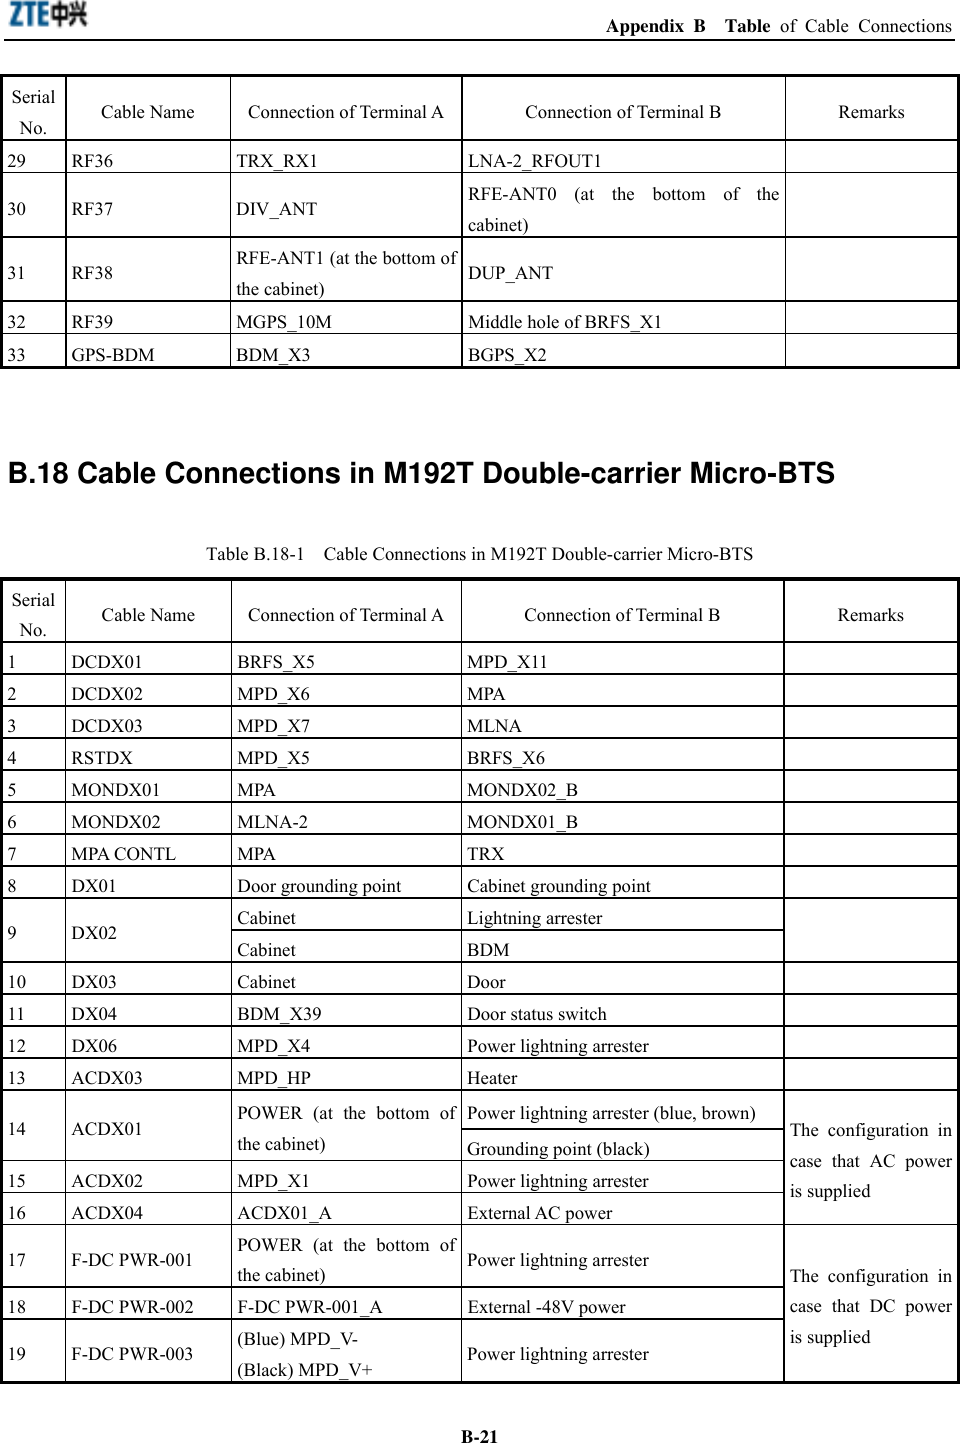  Appendix B  Table of Cable Connections  B-21Serial No.  Cable Name  Connection of Terminal A Connection of Terminal B  Remarks 29 RF36  TRX_RX1  LNA-2_RFOUT1   30 RF37  DIV_ANT  RFE-ANT0 (at the bottom of the cabinet)   31 RF38  RFE-ANT1 (at the bottom of the cabinet)  DUP_ANT  32  RF39  MGPS_10M  Middle hole of BRFS_X1   33 GPS-BDM  BDM_X3  BGPS_X2    B.18 Cable Connections in M192T Double-carrier Micro-BTS Table B.18-1    Cable Connections in M192T Double-carrier Micro-BTS Serial No.  Cable Name  Connection of Terminal A Connection of Terminal B  Remarks 1 DCDX01  BRFS_X5  MPD_X11   2 DCDX02  MPD_X6  MPA   3 DCDX03  MPD_X7  MLNA   4 RSTDX  MPD_X5  BRFS_X6   5 MONDX01  MPA  MONDX02_B   6 MONDX02  MLNA-2  MONDX01_B   7 MPA CONTL  MPA  TRX   8  DX01  Door grounding point  Cabinet grounding point   Cabinet Lightning arrester  9 DX02  Cabinet BDM   10 DX03  Cabinet  Door   11  DX04  BDM_X39  Door status switch   12  DX06  MPD_X4  Power lightning arrester   13 ACDX03  MPD_HP  Heater   Power lightning arrester (blue, brown) 14 ACDX01  POWER (at the bottom of the cabinet)  Grounding point (black) 15  ACDX02  MPD_X1  Power lightning arrester 16 ACDX04  ACDX01_A  External AC power The configuration in case that AC power is supplied 17 F-DC PWR-001 POWER (at the bottom of the cabinet)  Power lightning arrester 18  F-DC PWR-002  F-DC PWR-001_A  External -48V power 19 F-DC PWR-003 (Blue) MPD_V- (Black) MPD_V+  Power lightning arrester The configuration in case that DC power is supplied 